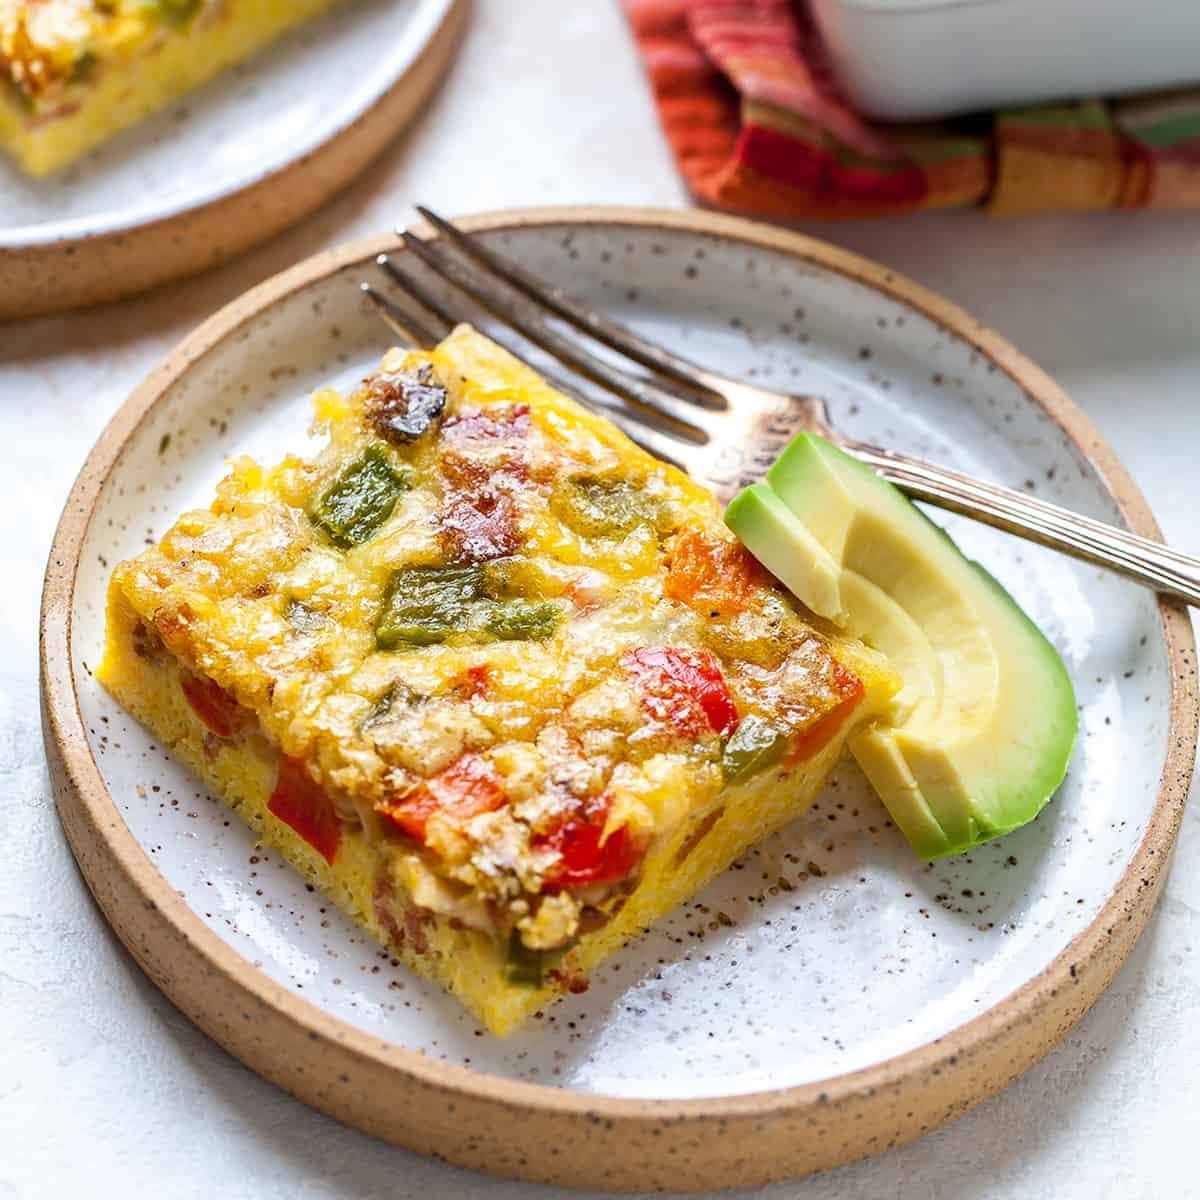 Slice of egg casserole with bacon, eggs, vegetables and cheese on a saucer with slices of avocado